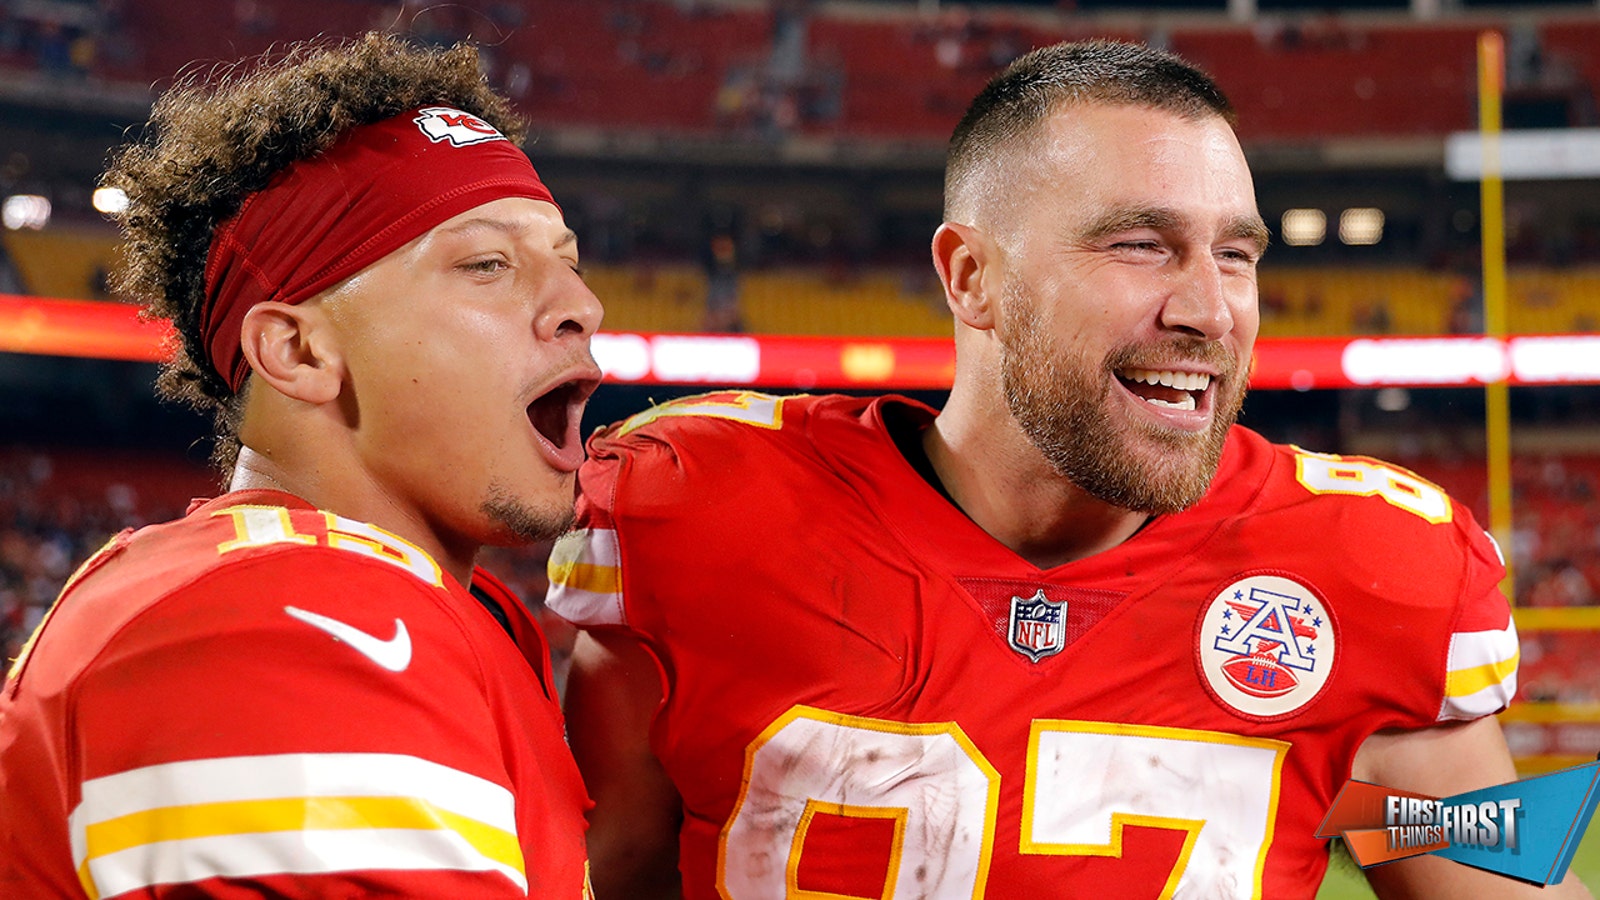 Patrick Mahomes calls Travis Kelce "the best TE of all time"